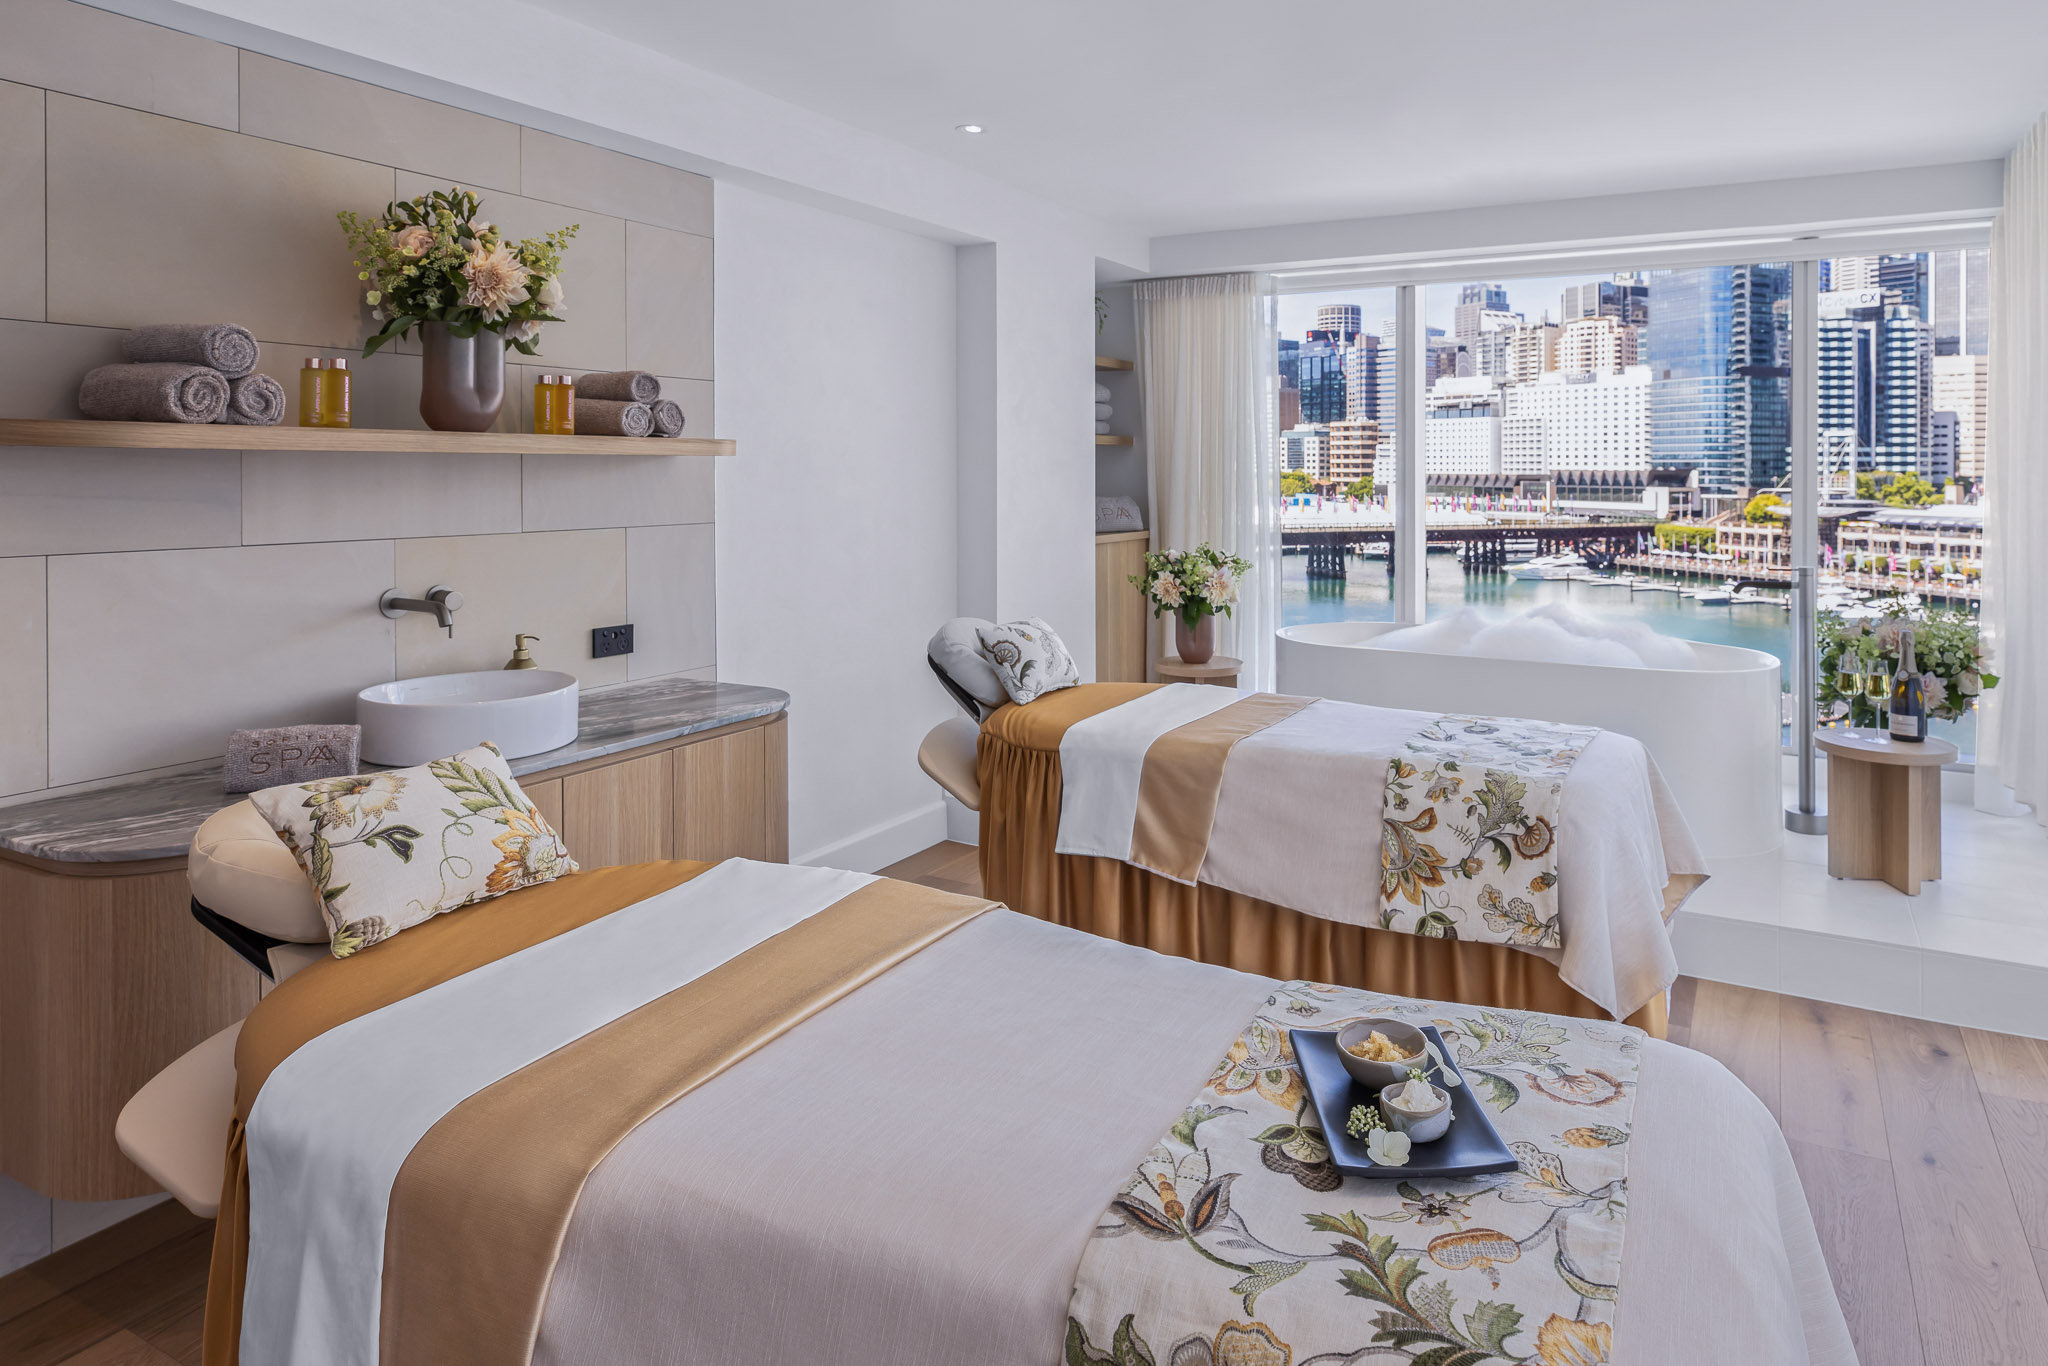 Sofitel Sydney Darling Harbour welcomes wellness and officially launches Sofitel SPA Darling Harbour